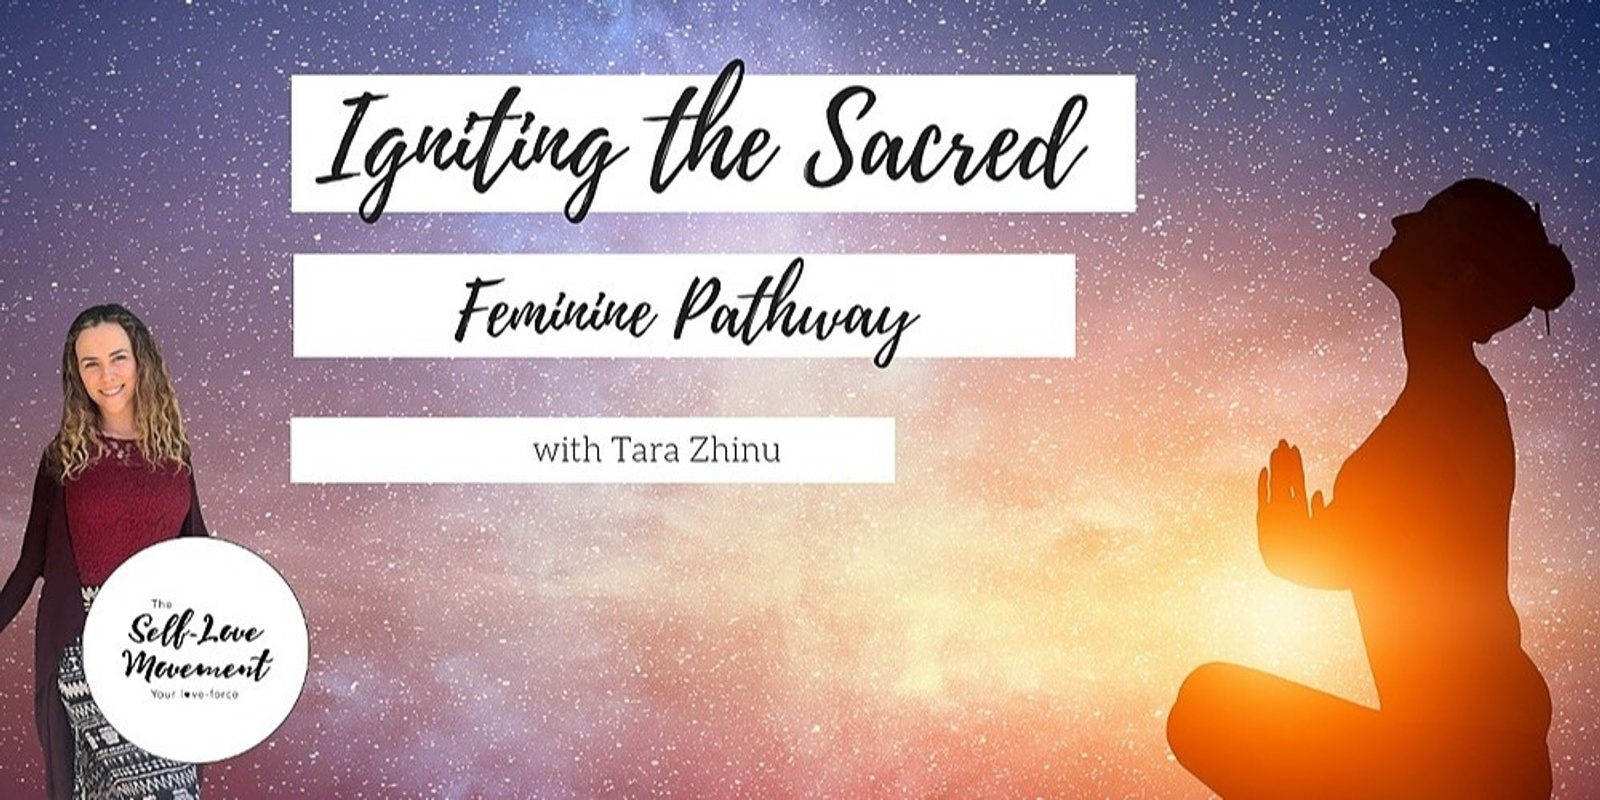 Banner image for Igniting the Sacred Feminine Pathway